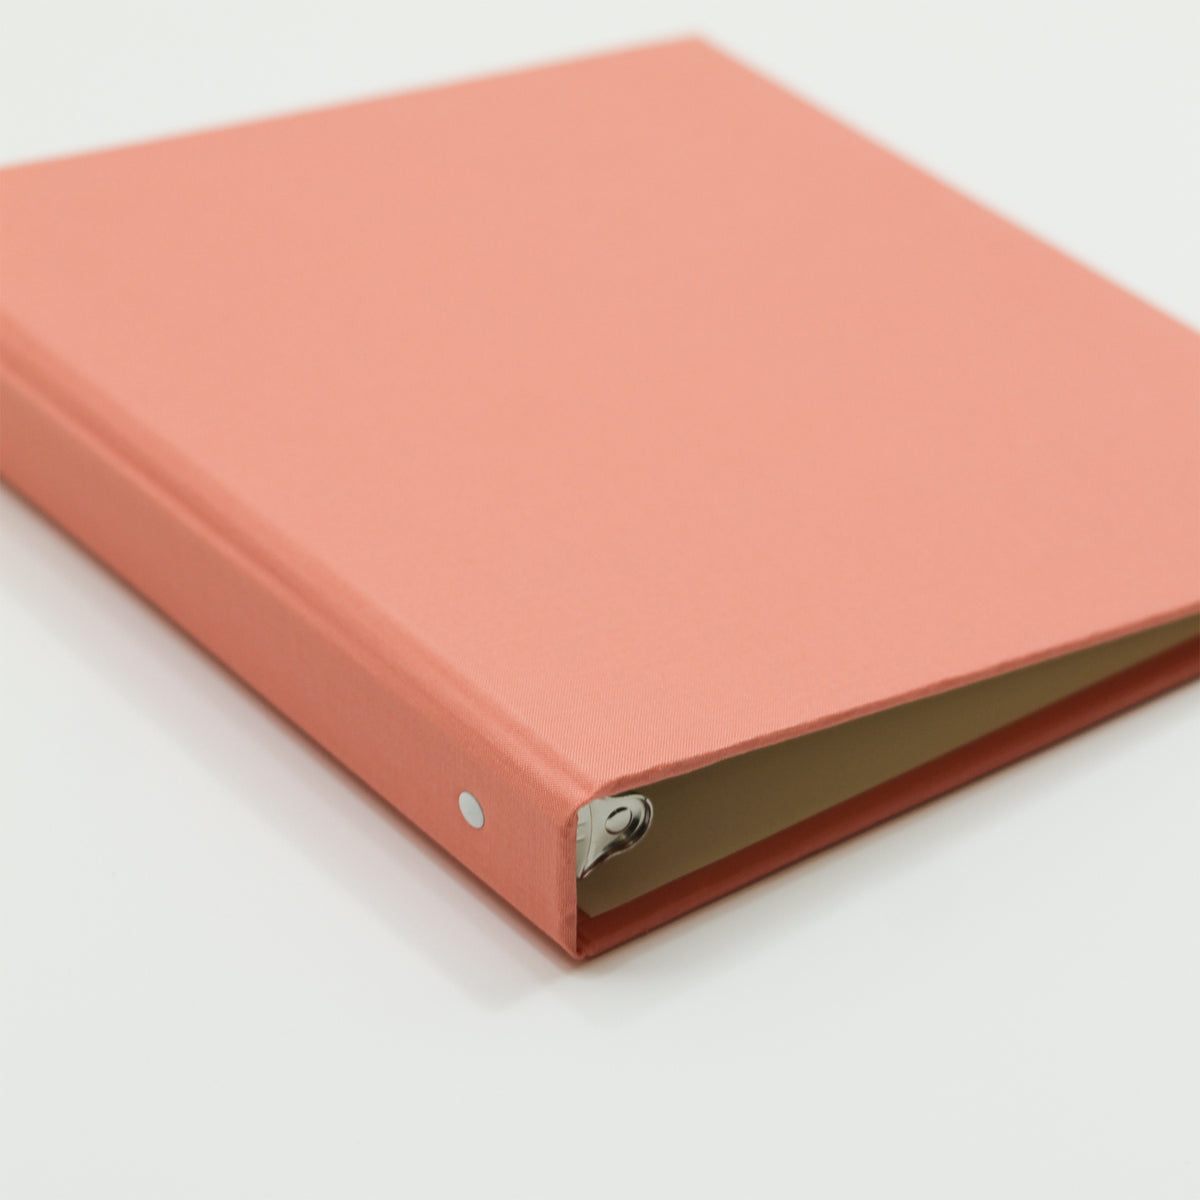 Officiant Binder | Cover: Coral Cotton | Available Personalized